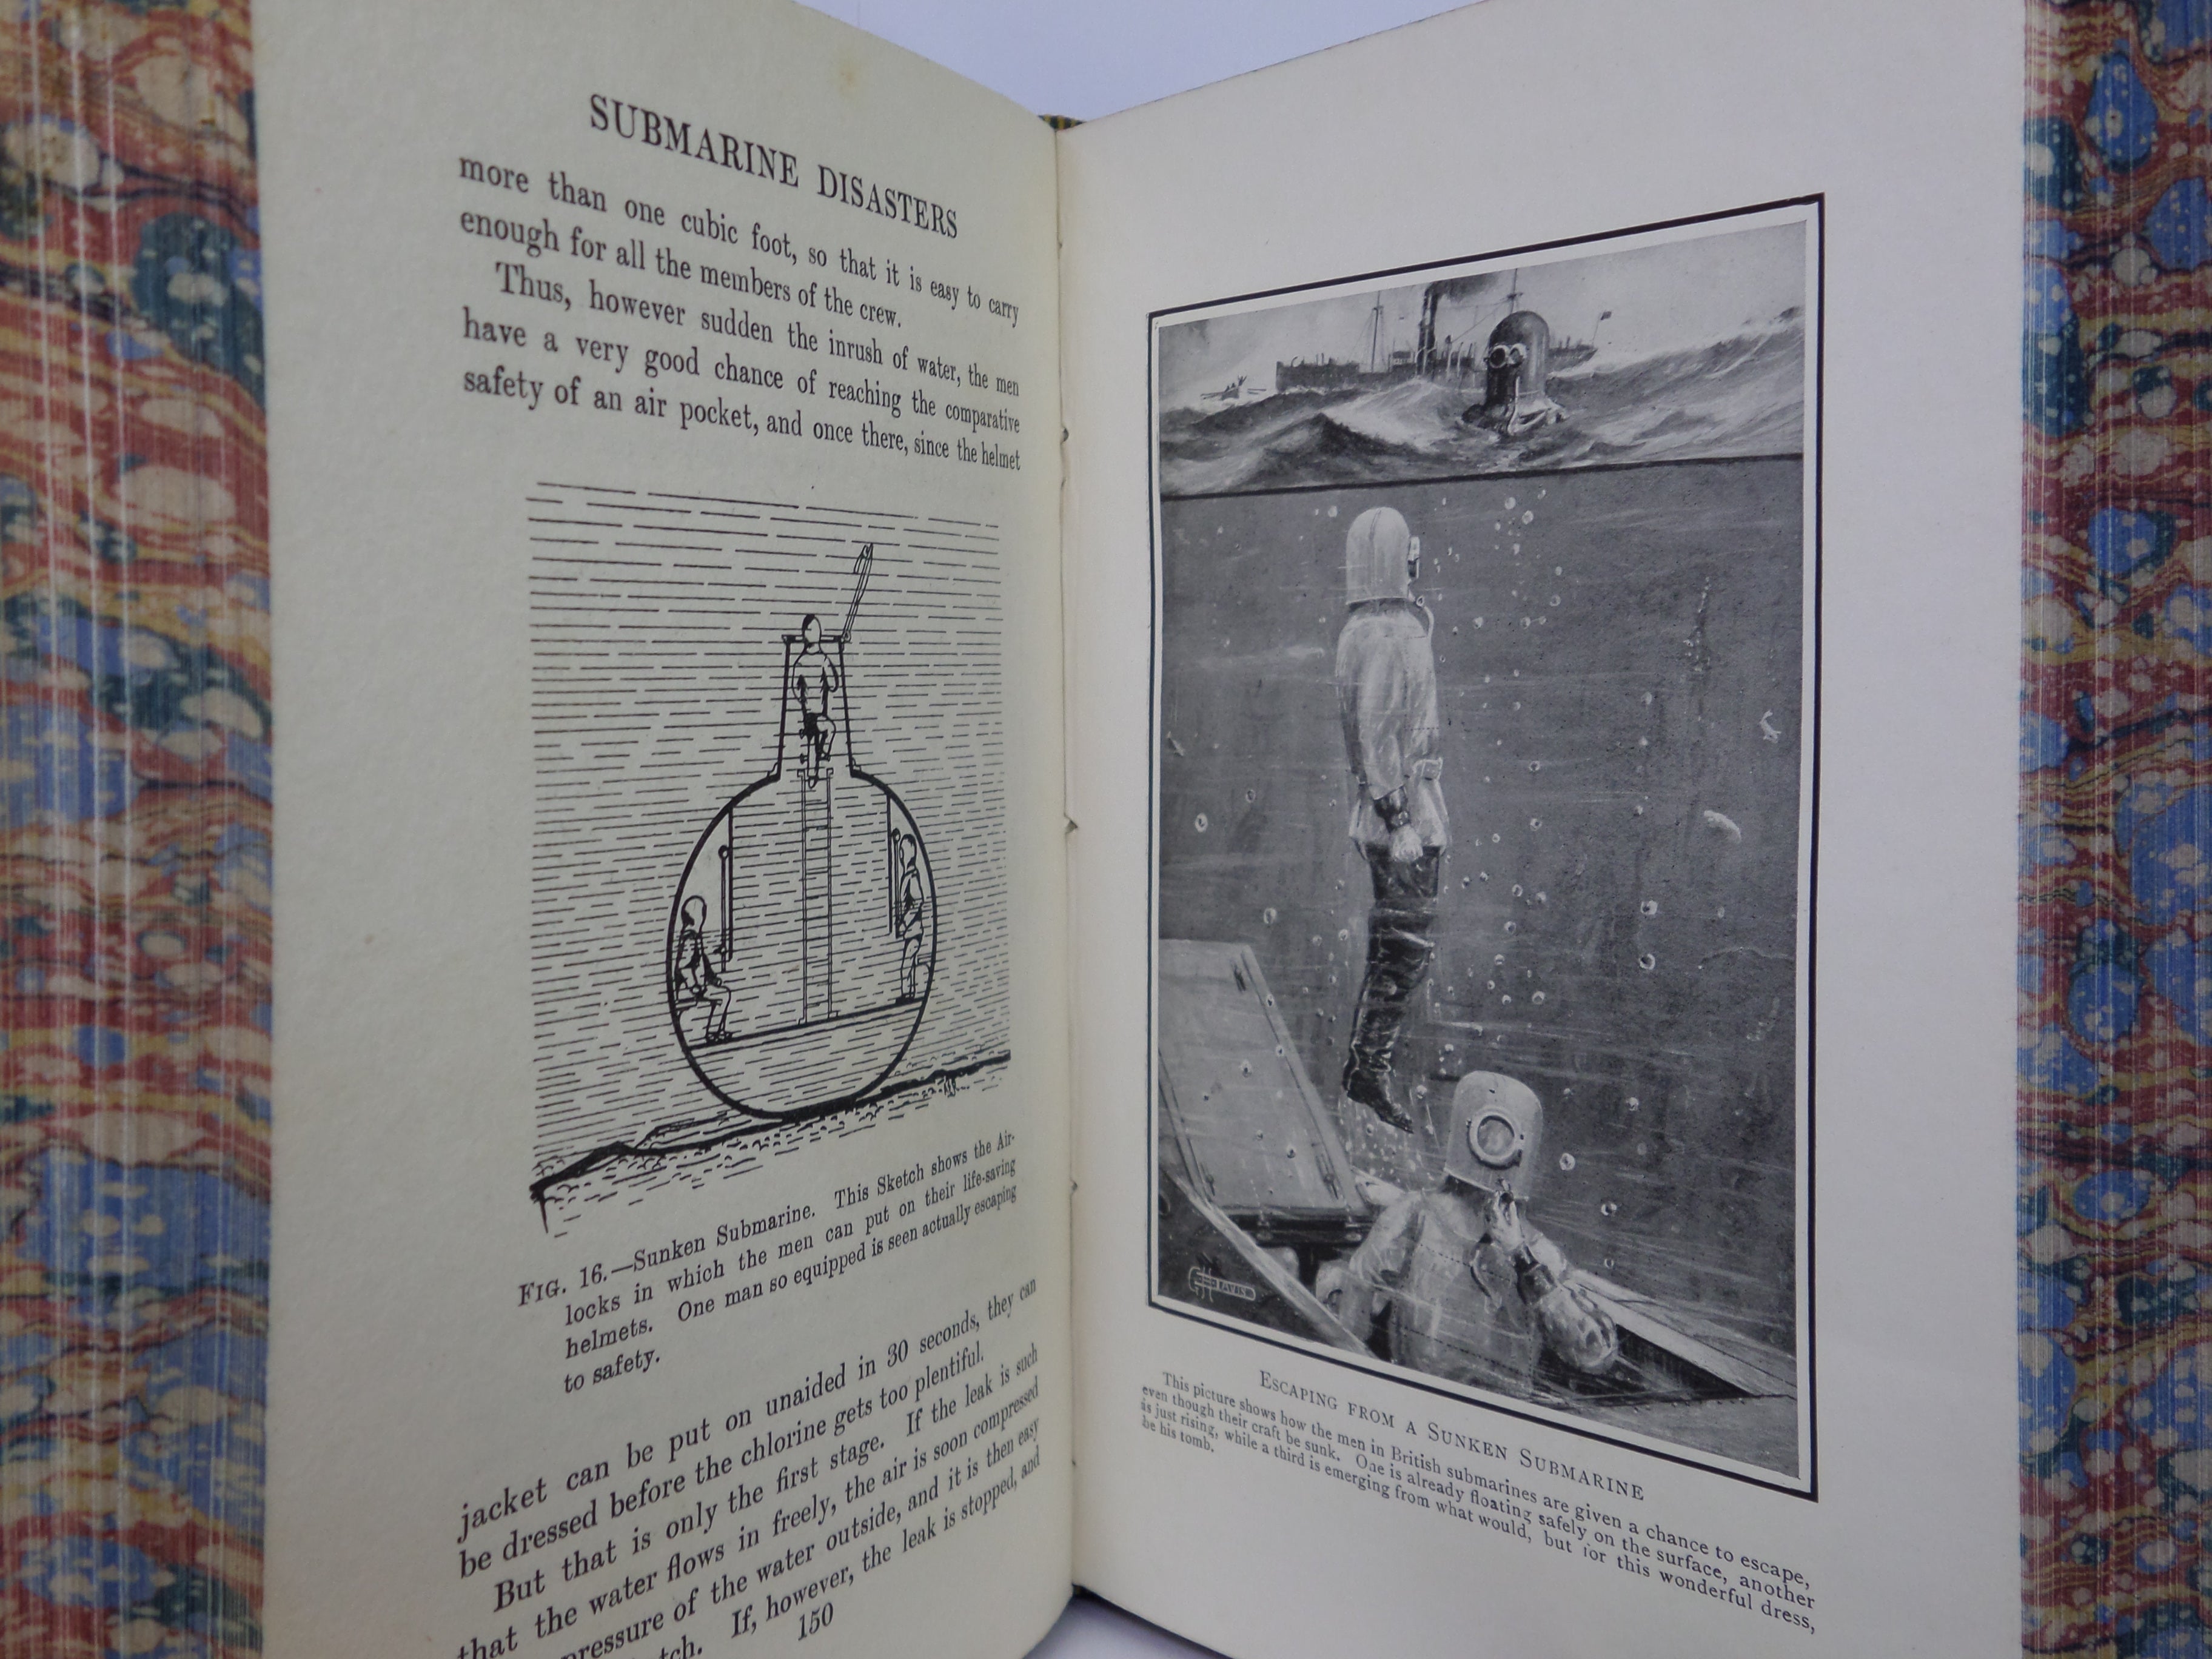 THE ROMANCE OF SUBMARINE ENGINEERING BY THOMAS CORBIN 1913 FIRST EDITION LEATHER BOUND BY RELFE